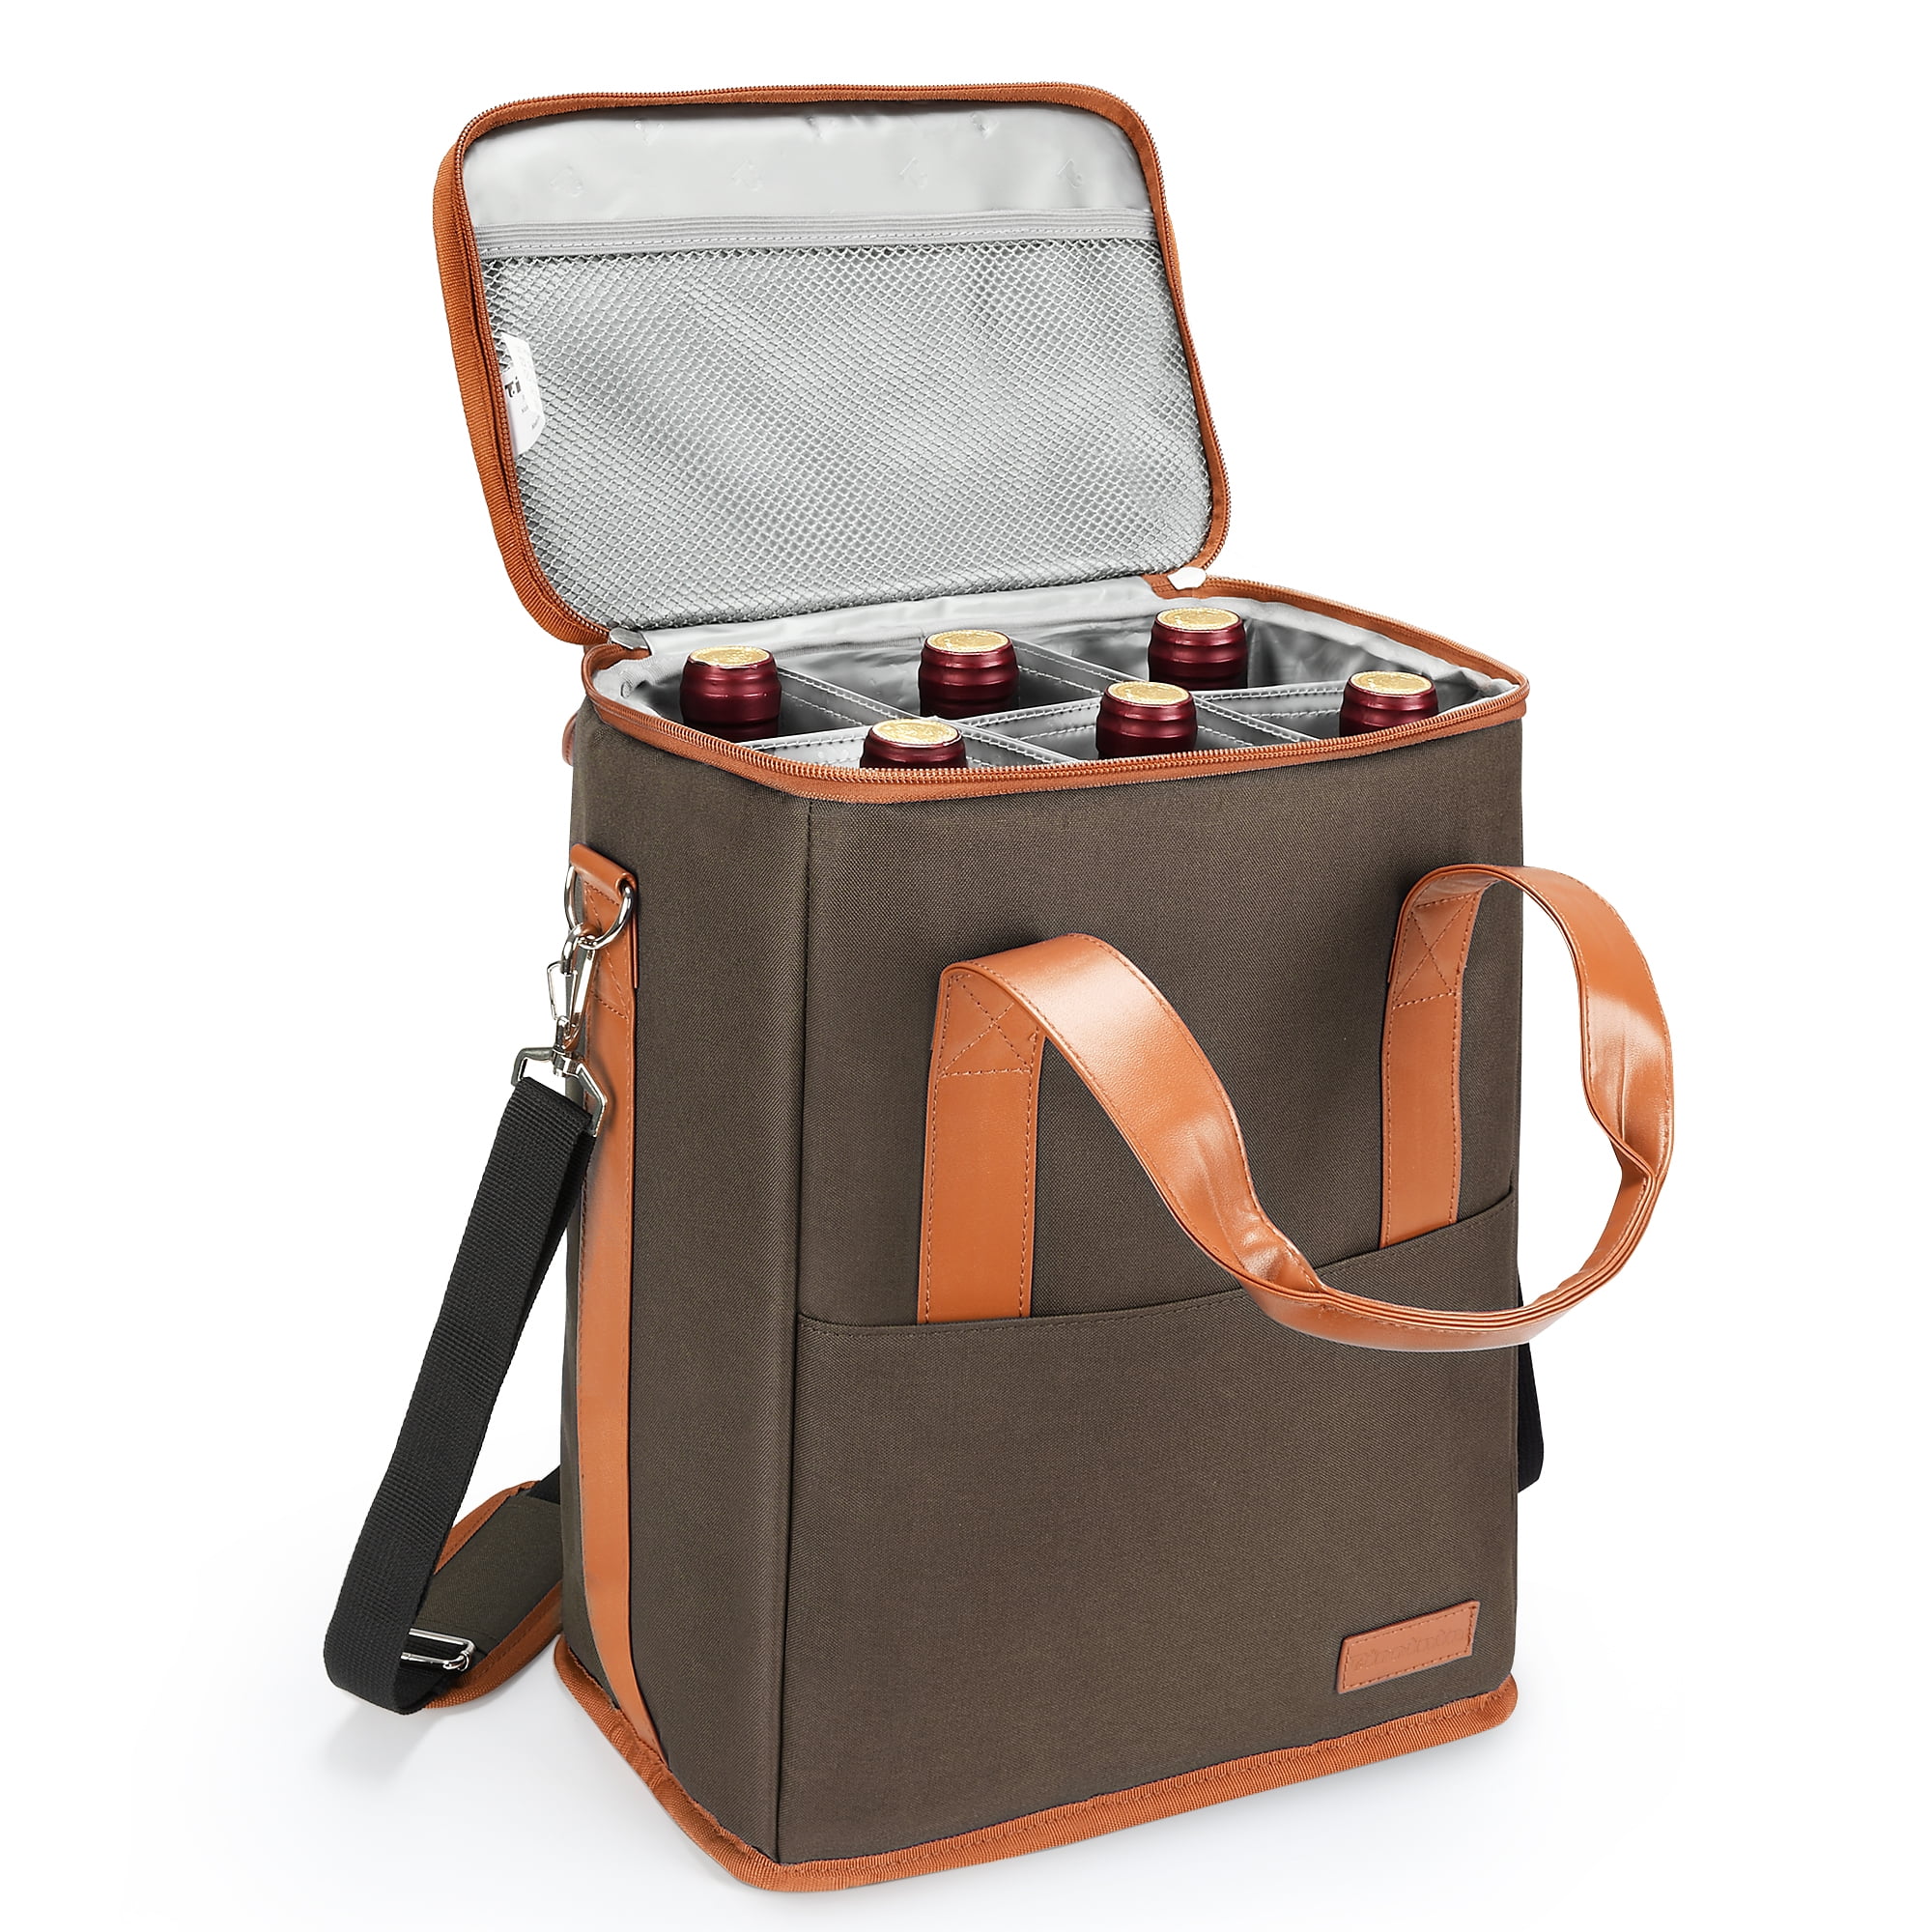 6 Bottle Wine Carrier Insulated Padded Carrying Cooler Tote Bag Handle Adjustable Shoulder Strap Travel Picnic IDEAL Lover Gift Brown 5d4018d6 a2d1 49a4 b02a 204187c4eb99.4678986e5eacd61164f936ba6e51017c